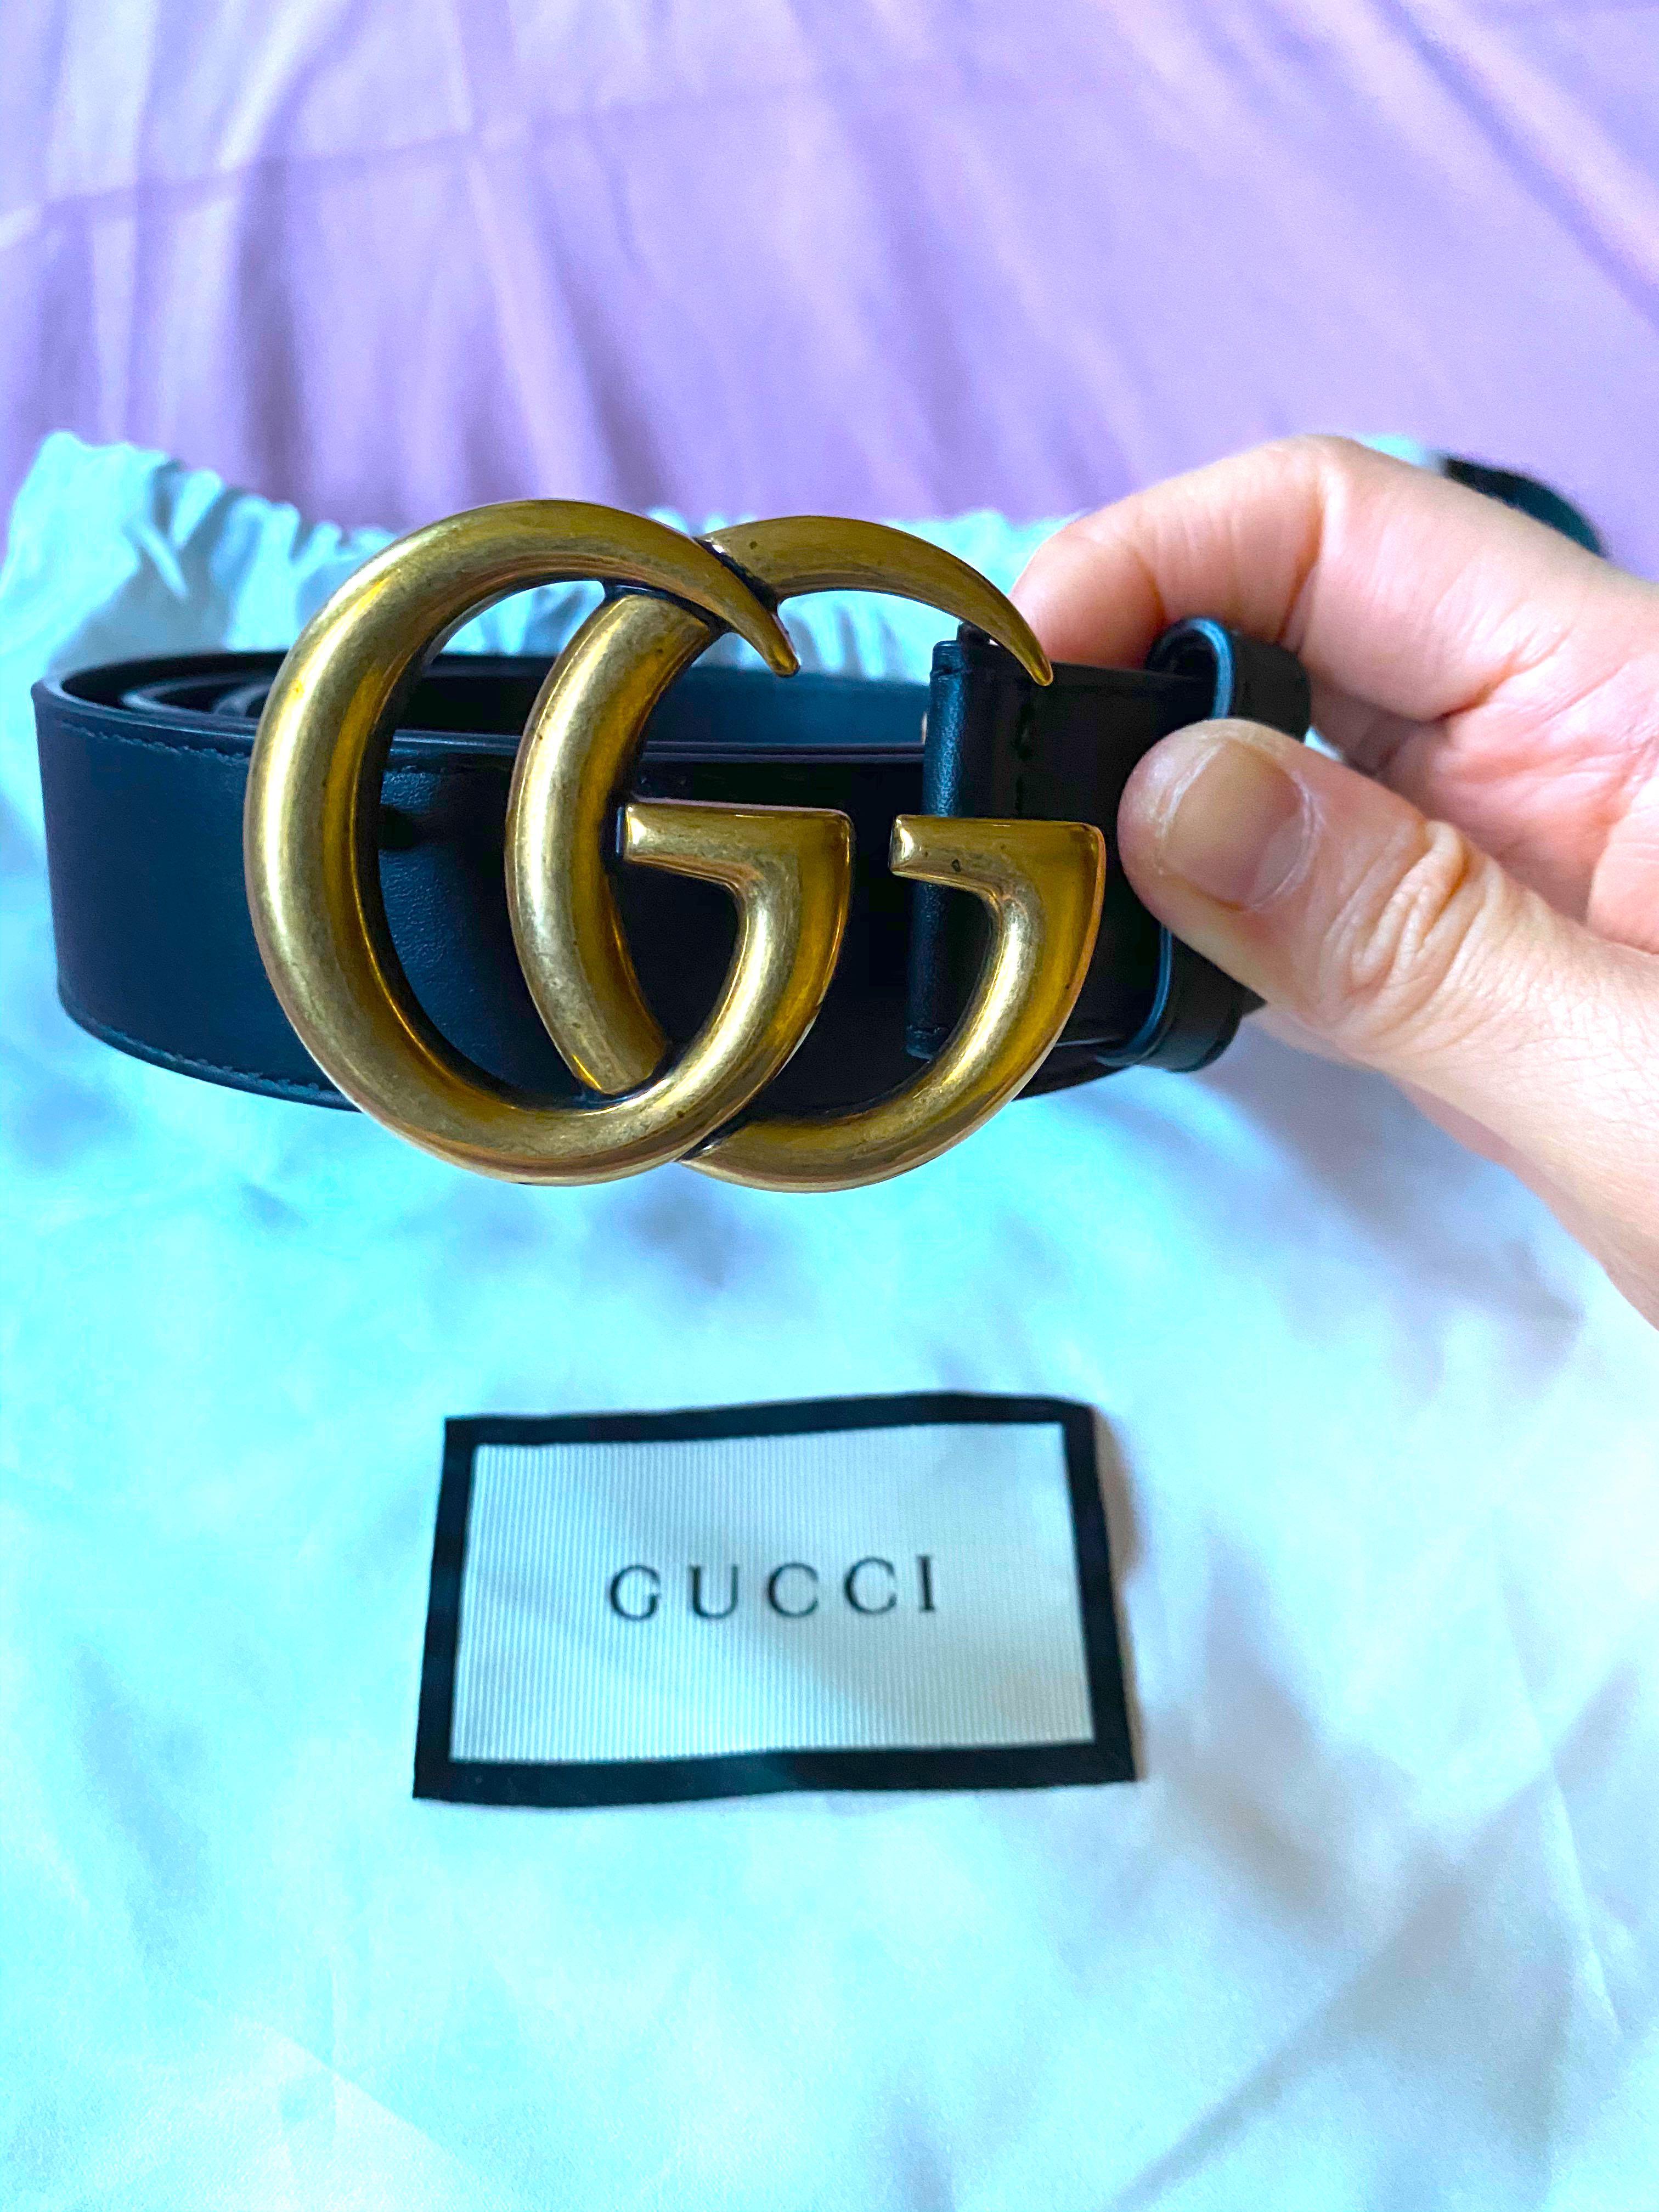 Gucci black leather belt size 85, Women's Fashion, Watches & Accessories, Carousell